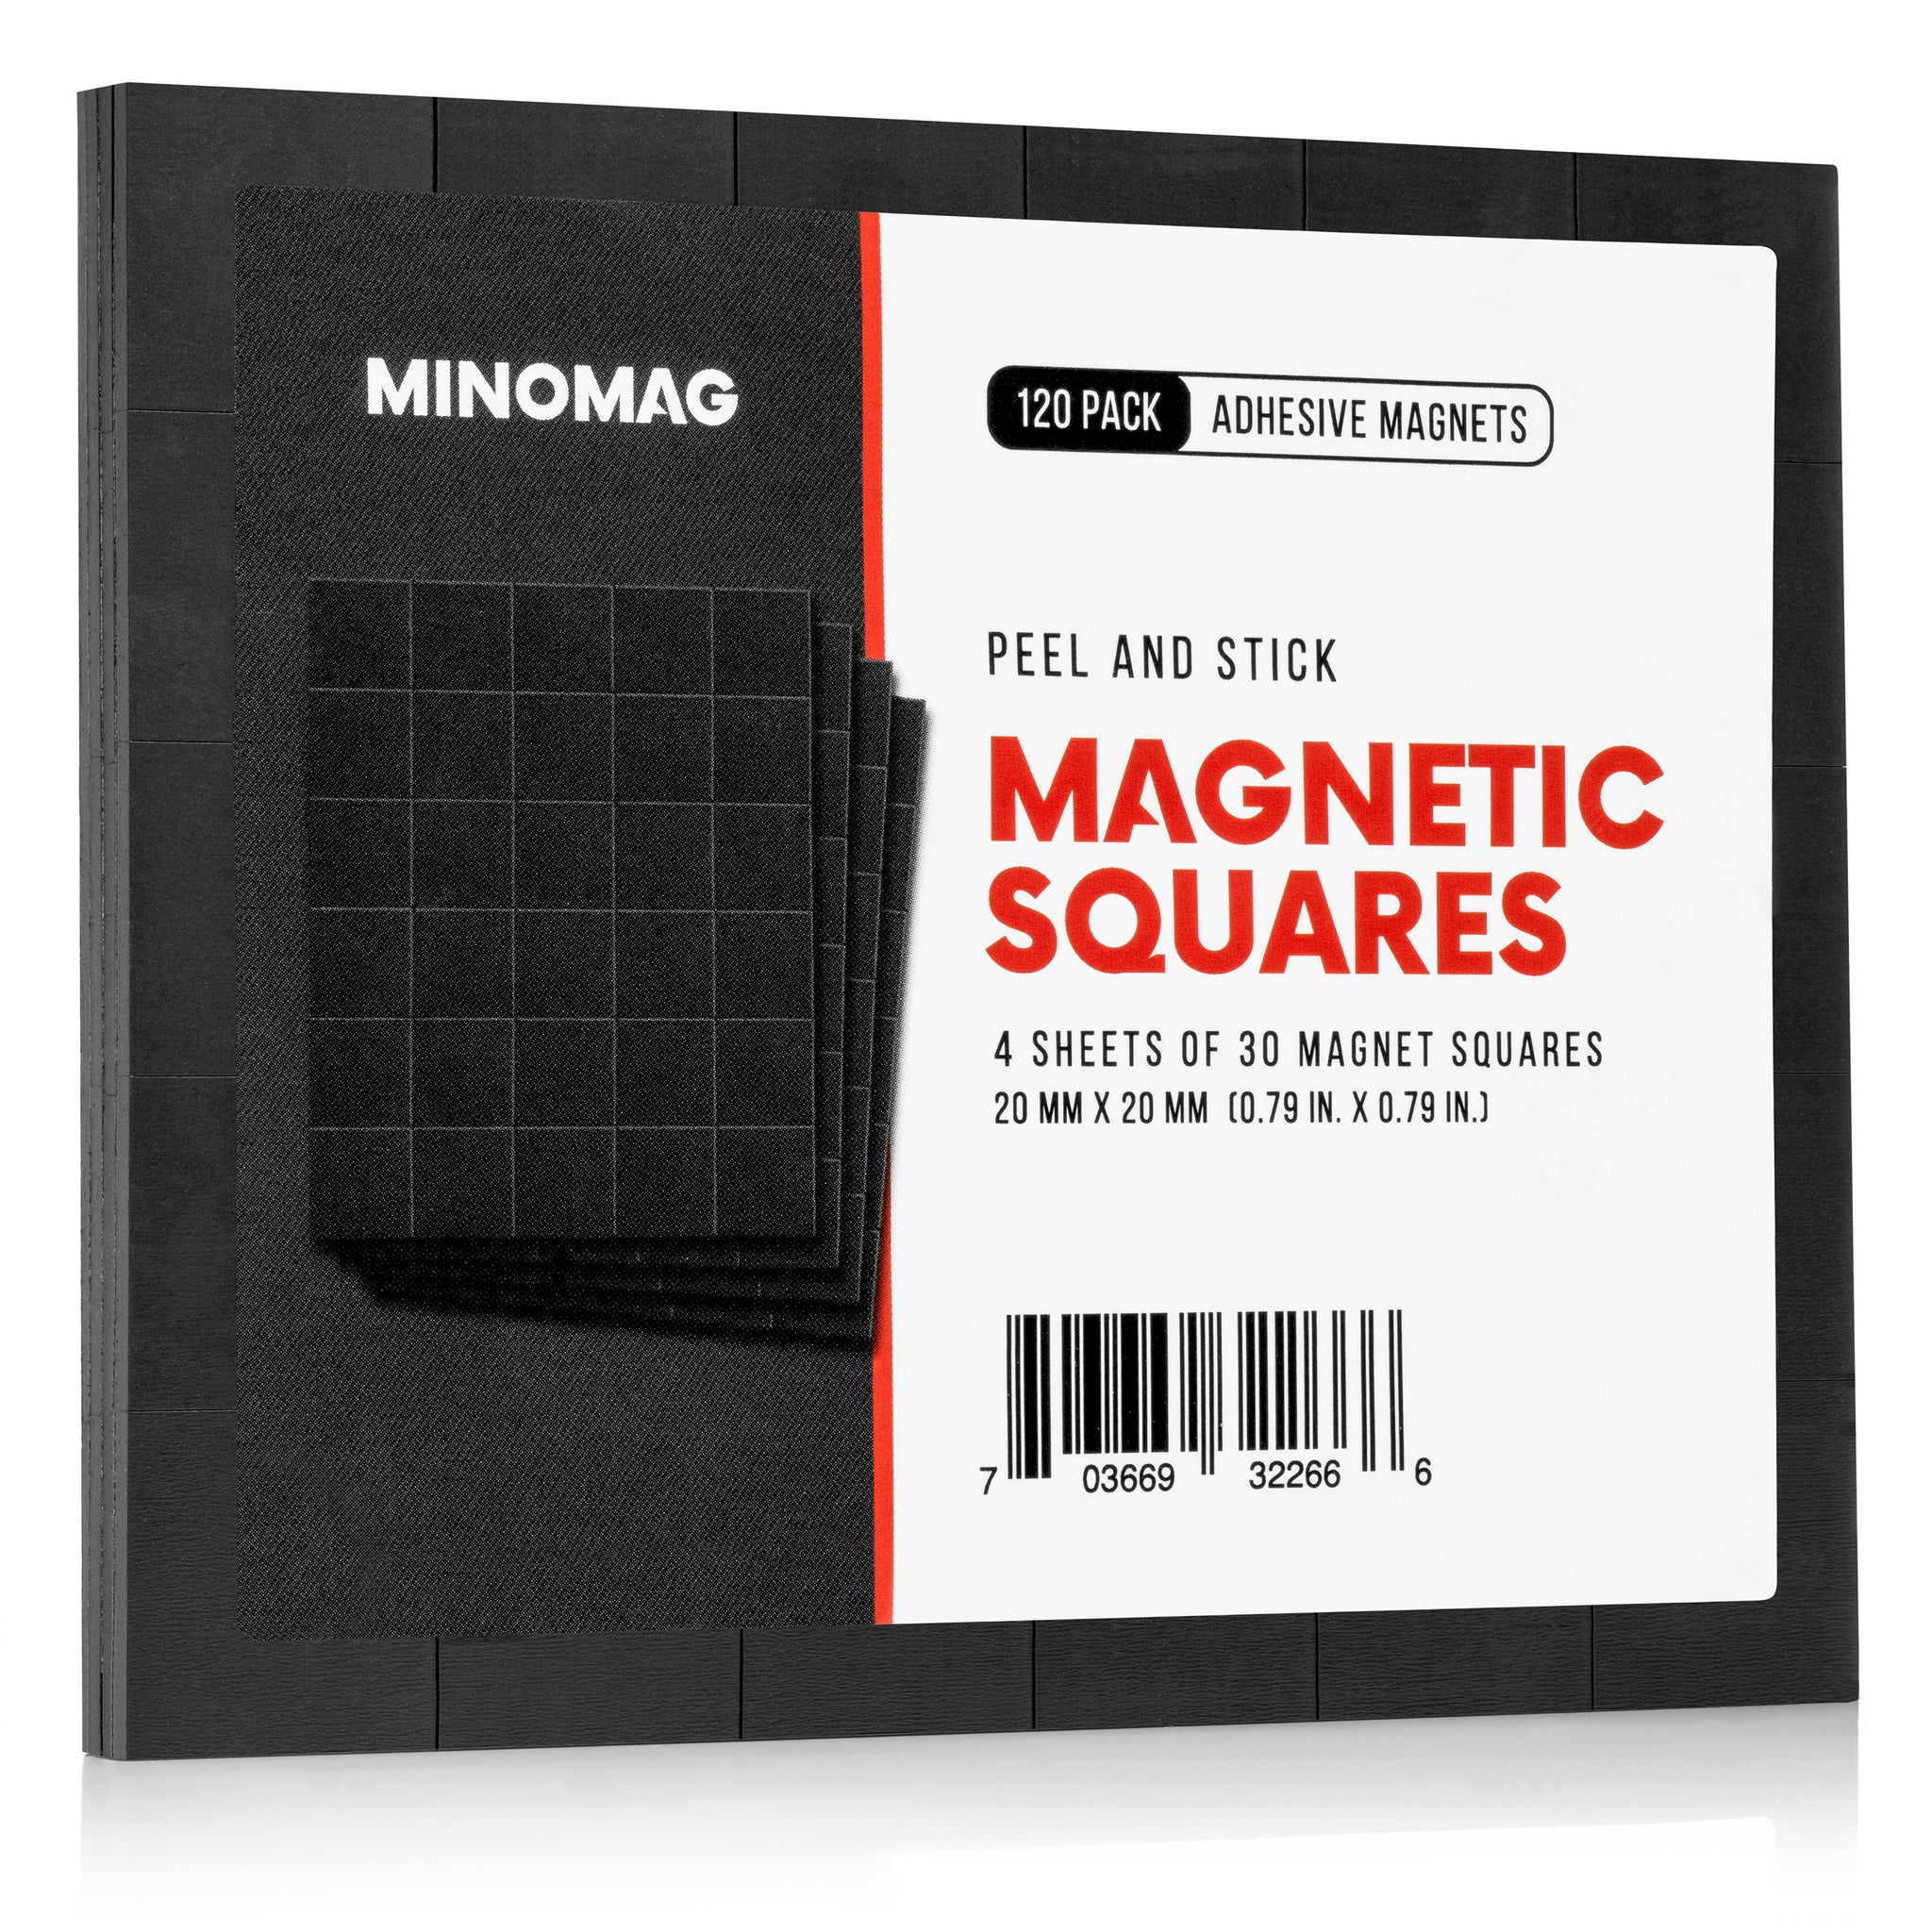 totalElement 1 x 1 inch Strong Flexible Self-Adhesive Magnetic Squares, Peel & Stick Refrigerator Magnet Squares (96 Pieces)